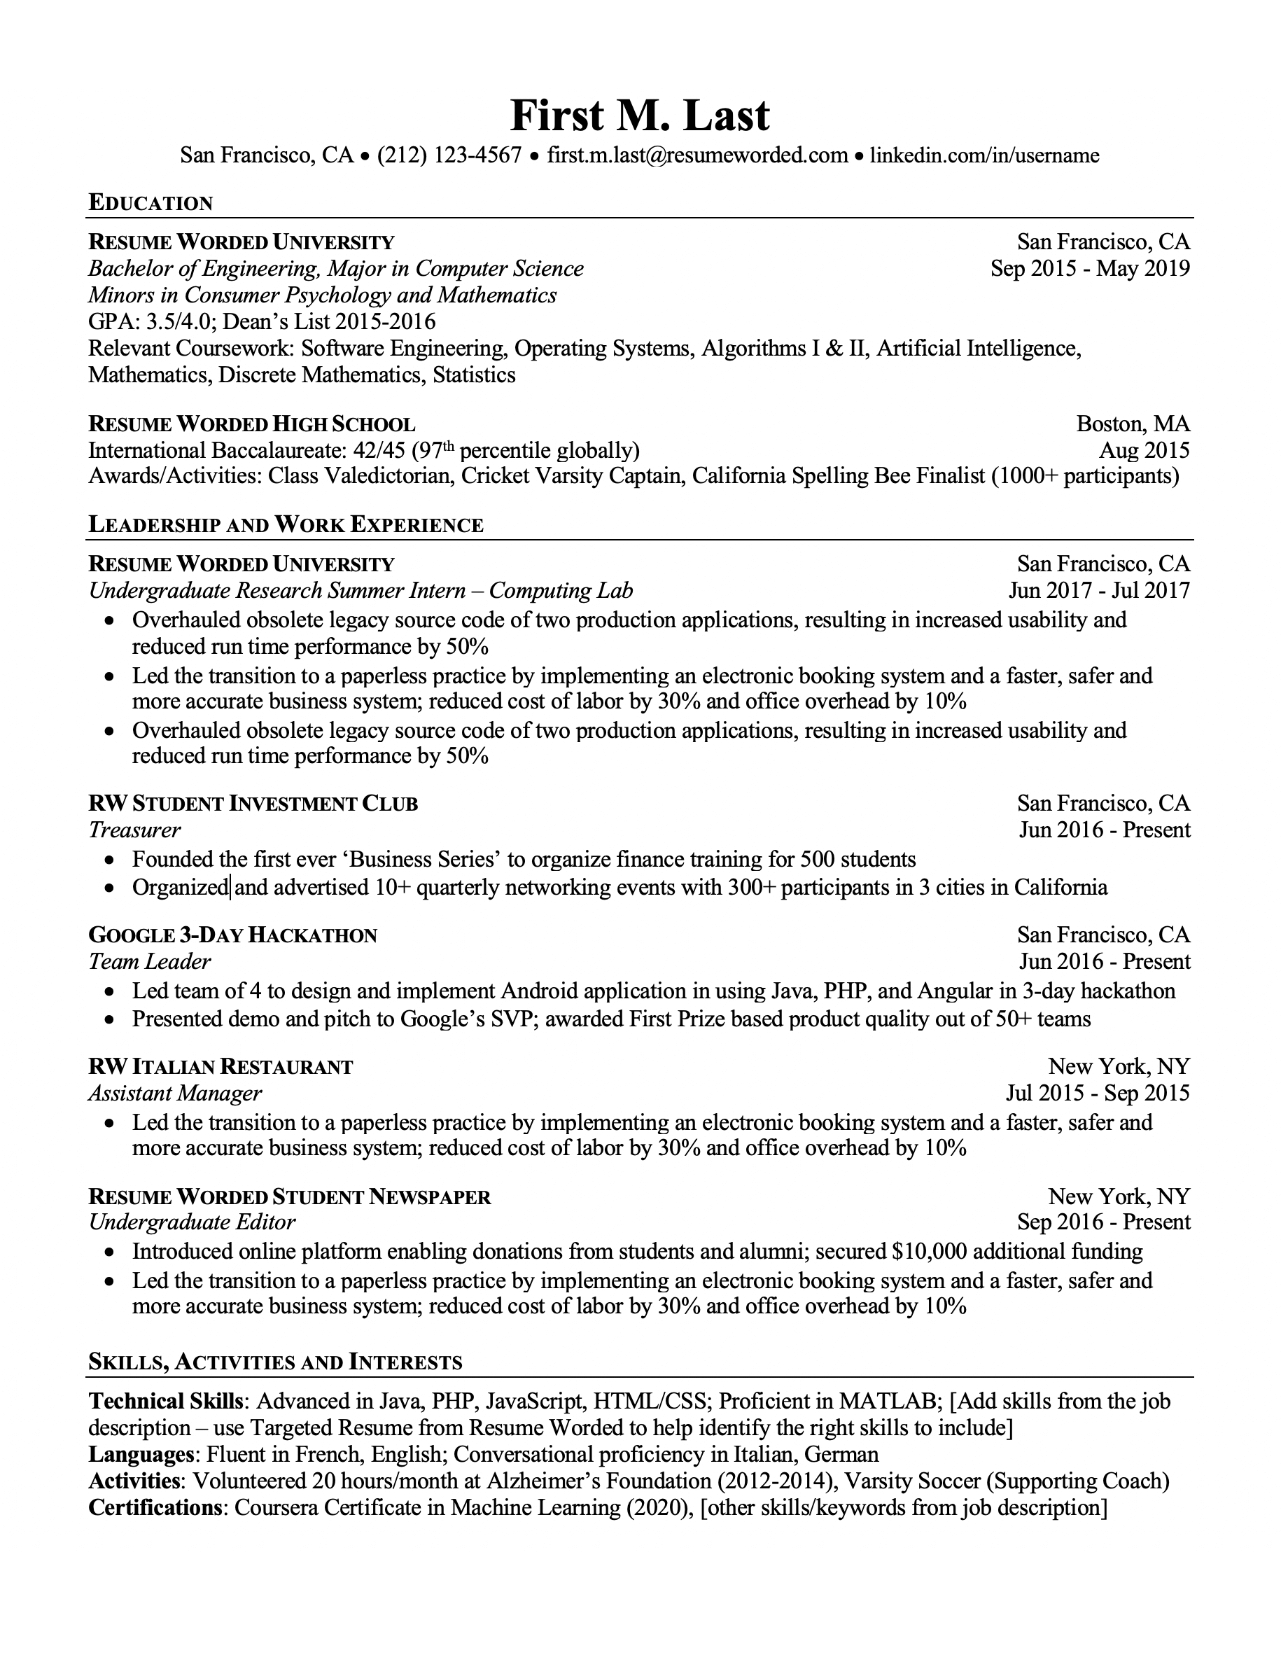 Professional Ats Resume Templates For Experienced Hires And within size 1281 X 1655